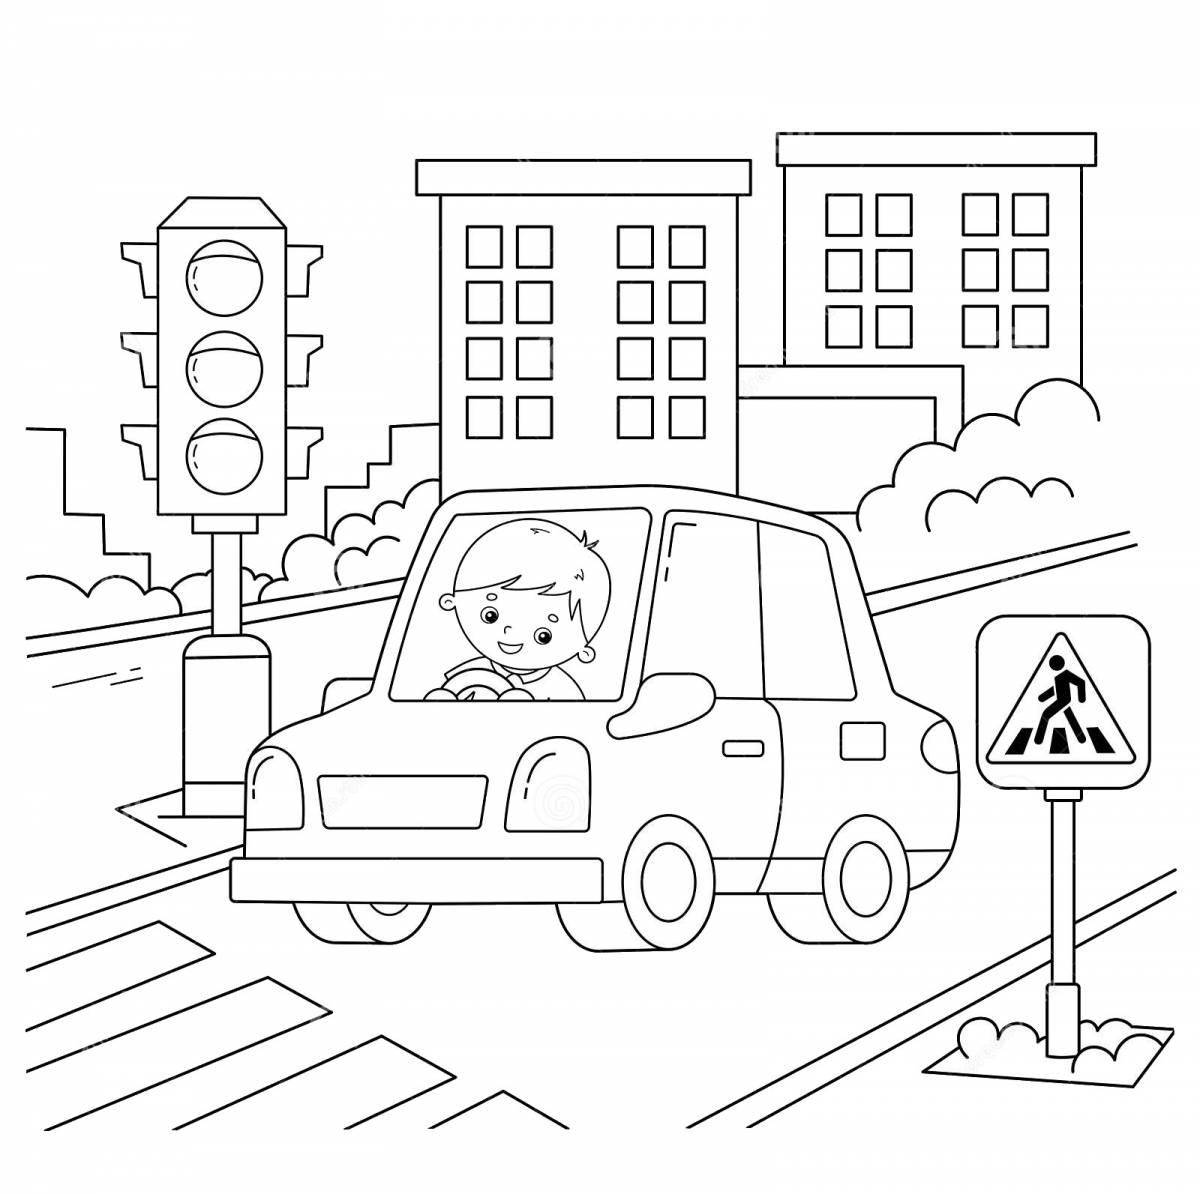 Funny traffic safety page